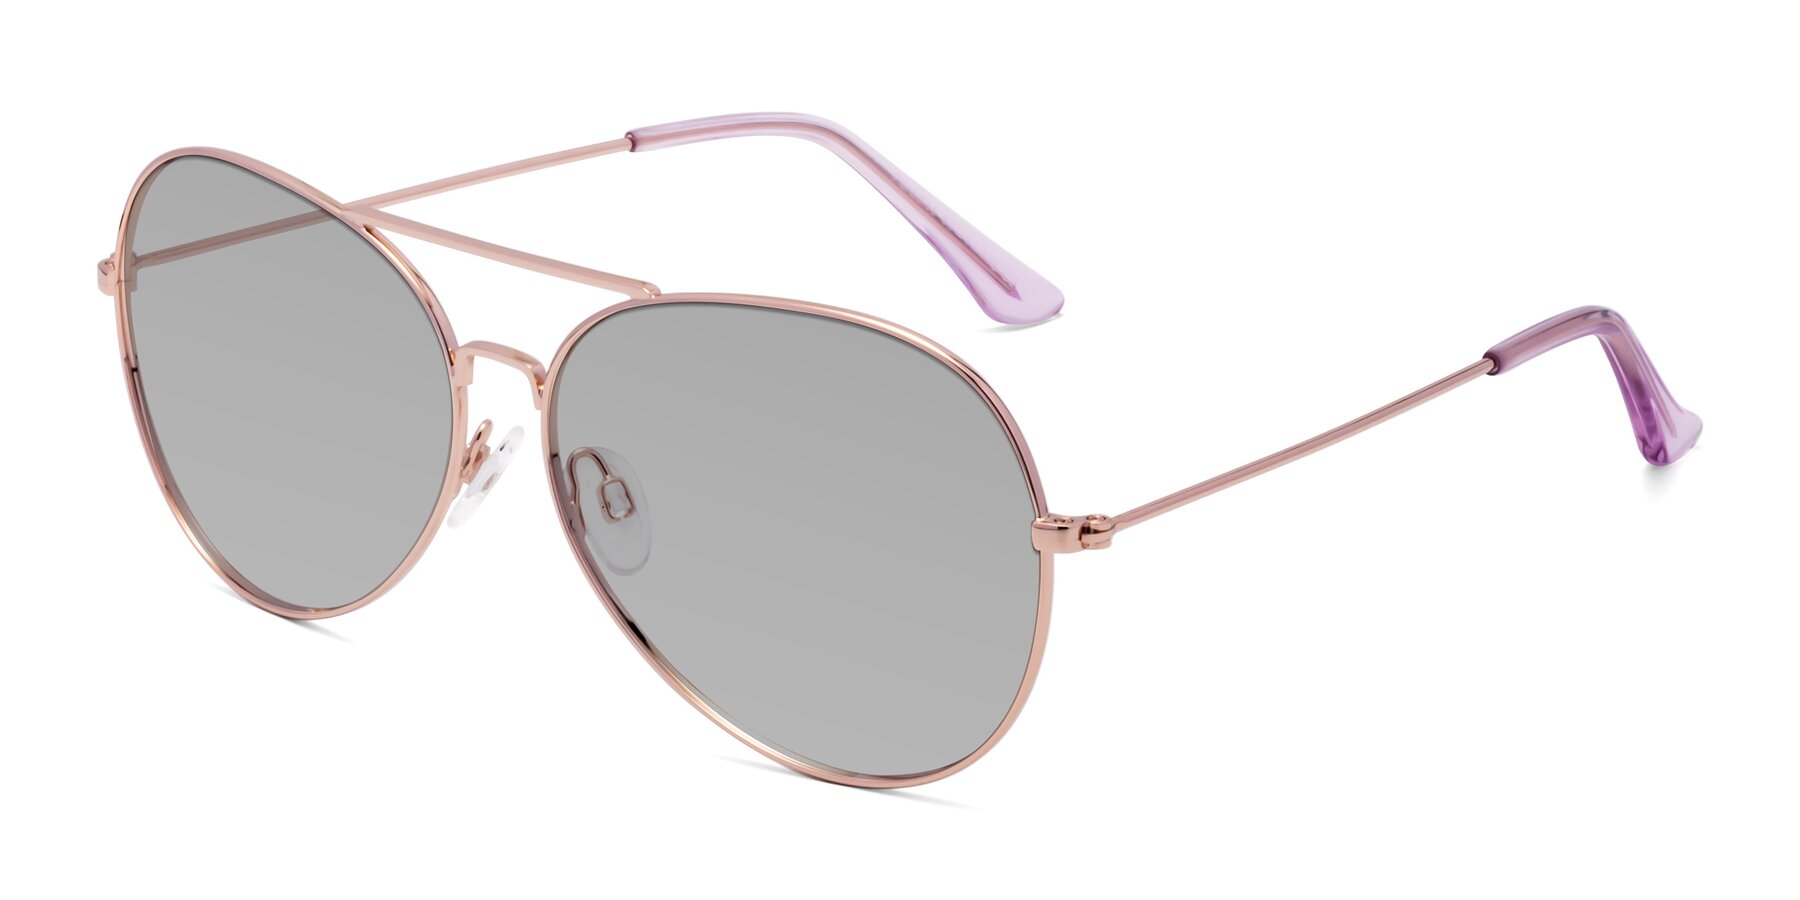 Angle of Paradise in Rose Gold with Light Gray Tinted Lenses